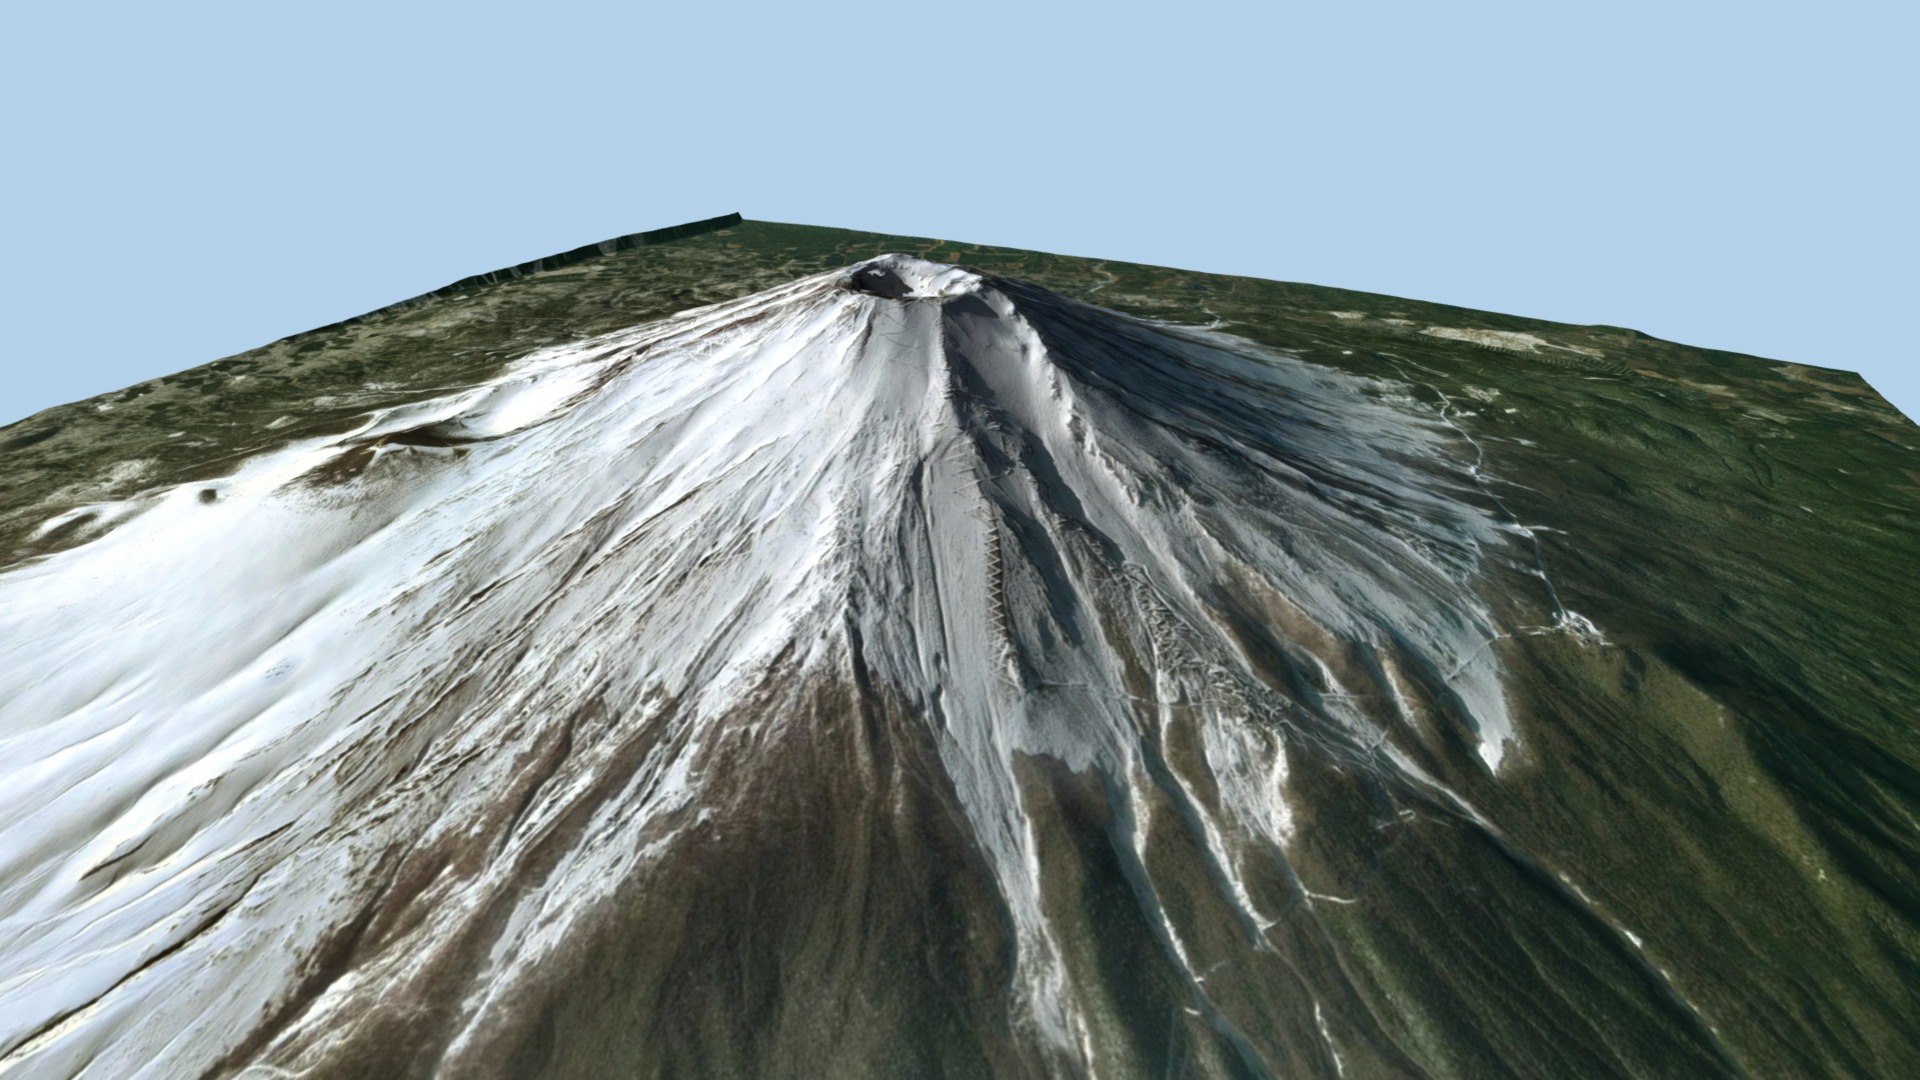 3D model Volcano Mountains – Mount Fuji - This is a 3D model of the Volcano Mountains - Mount Fuji. The 3D model is about a large rock with a hole in it.